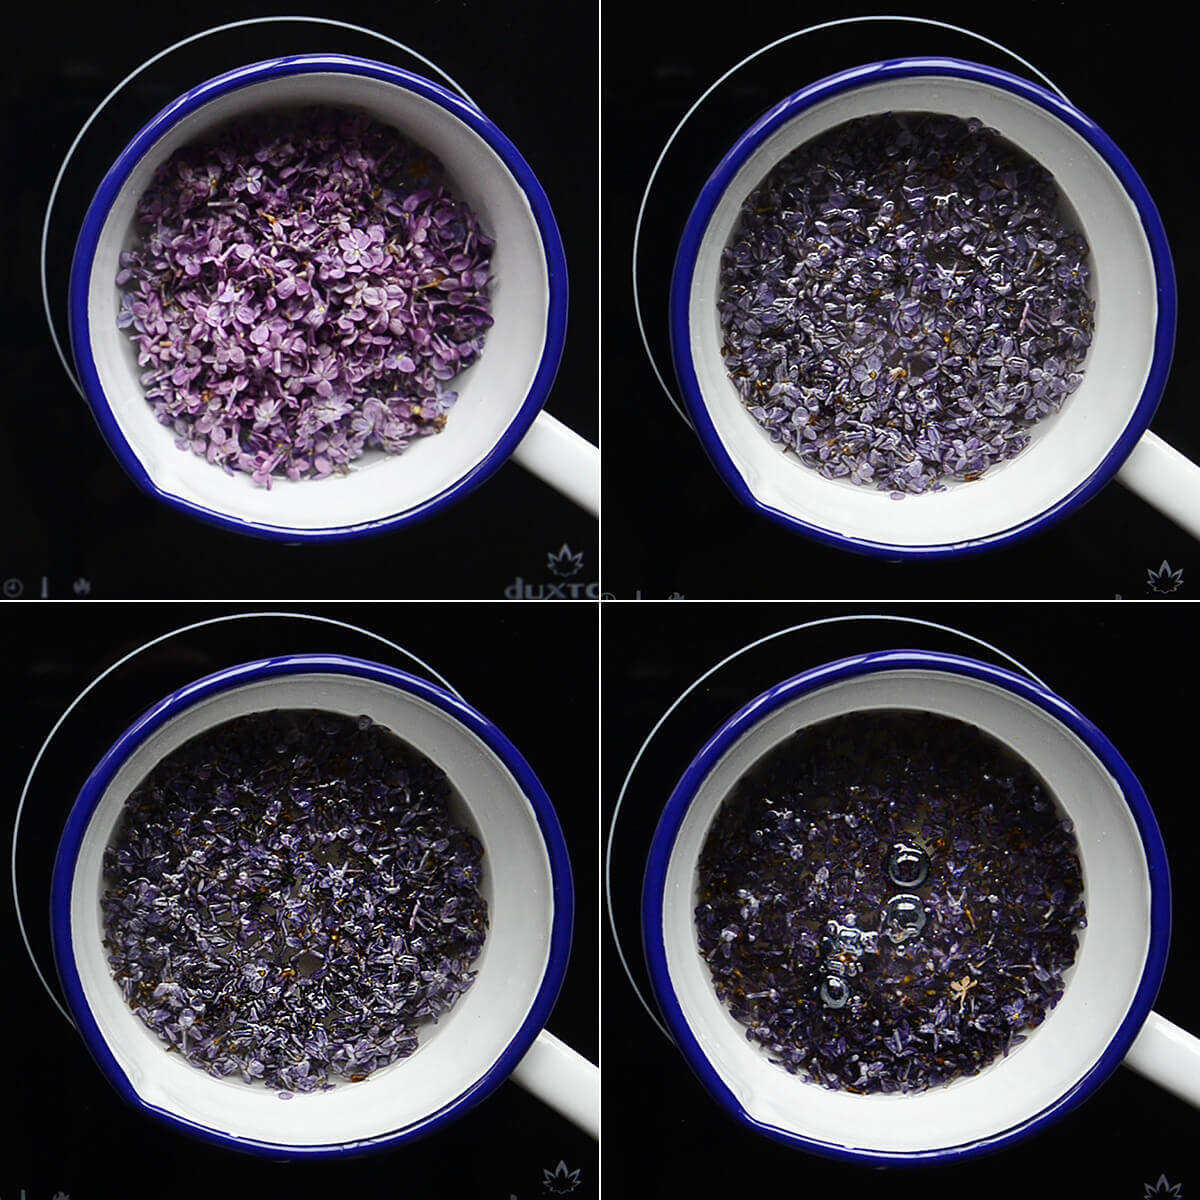 Collage of 4 photos showing the process of making lilac syrup